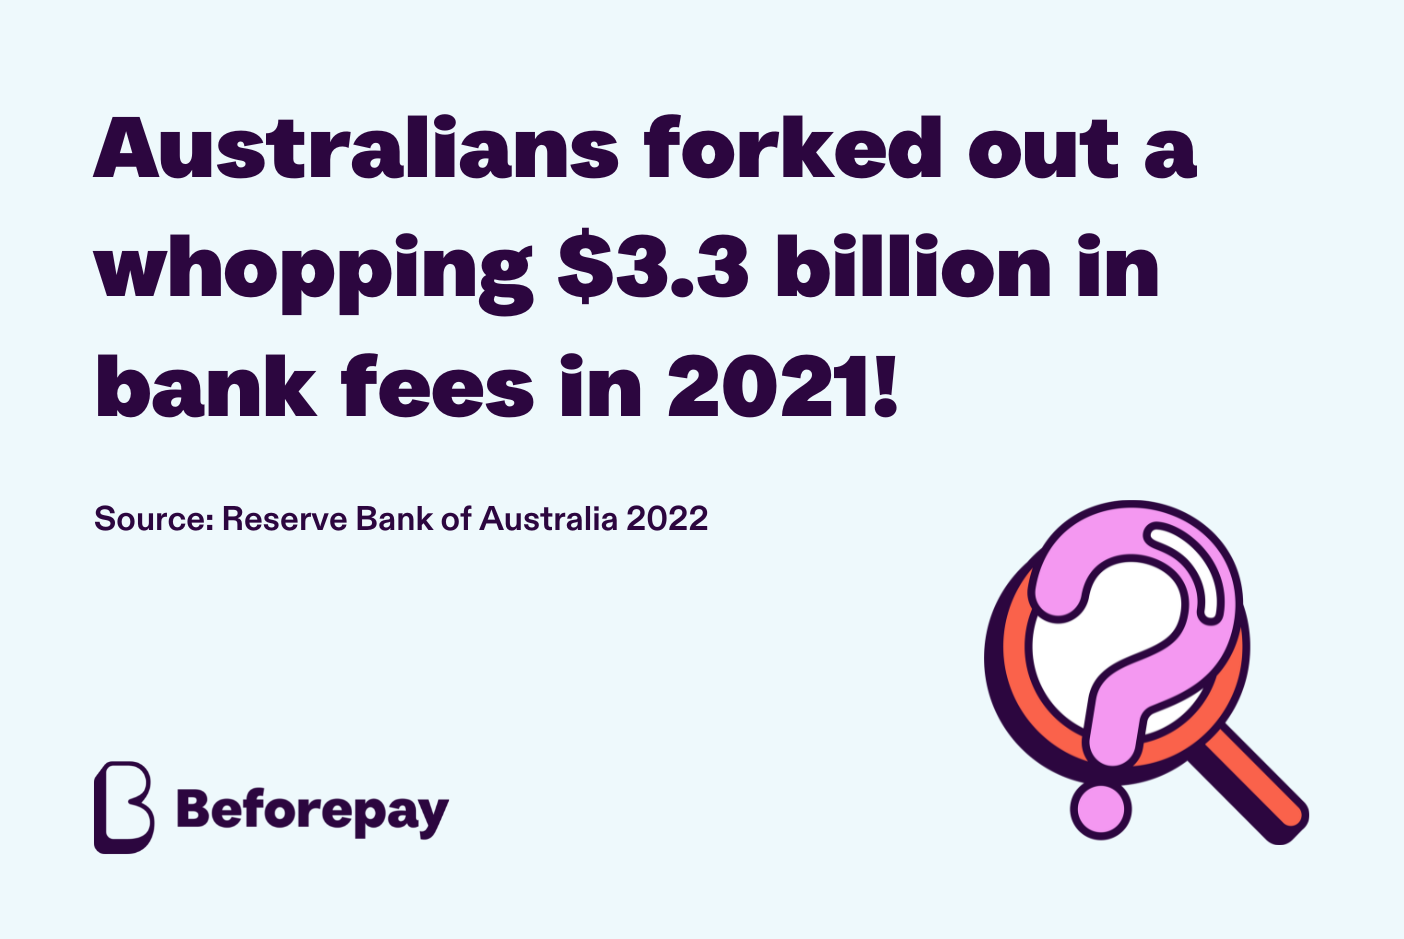 Australians paid $3.3 billion in bank fees in 2021, according to a 2022 Reserve Bank of Australia report.